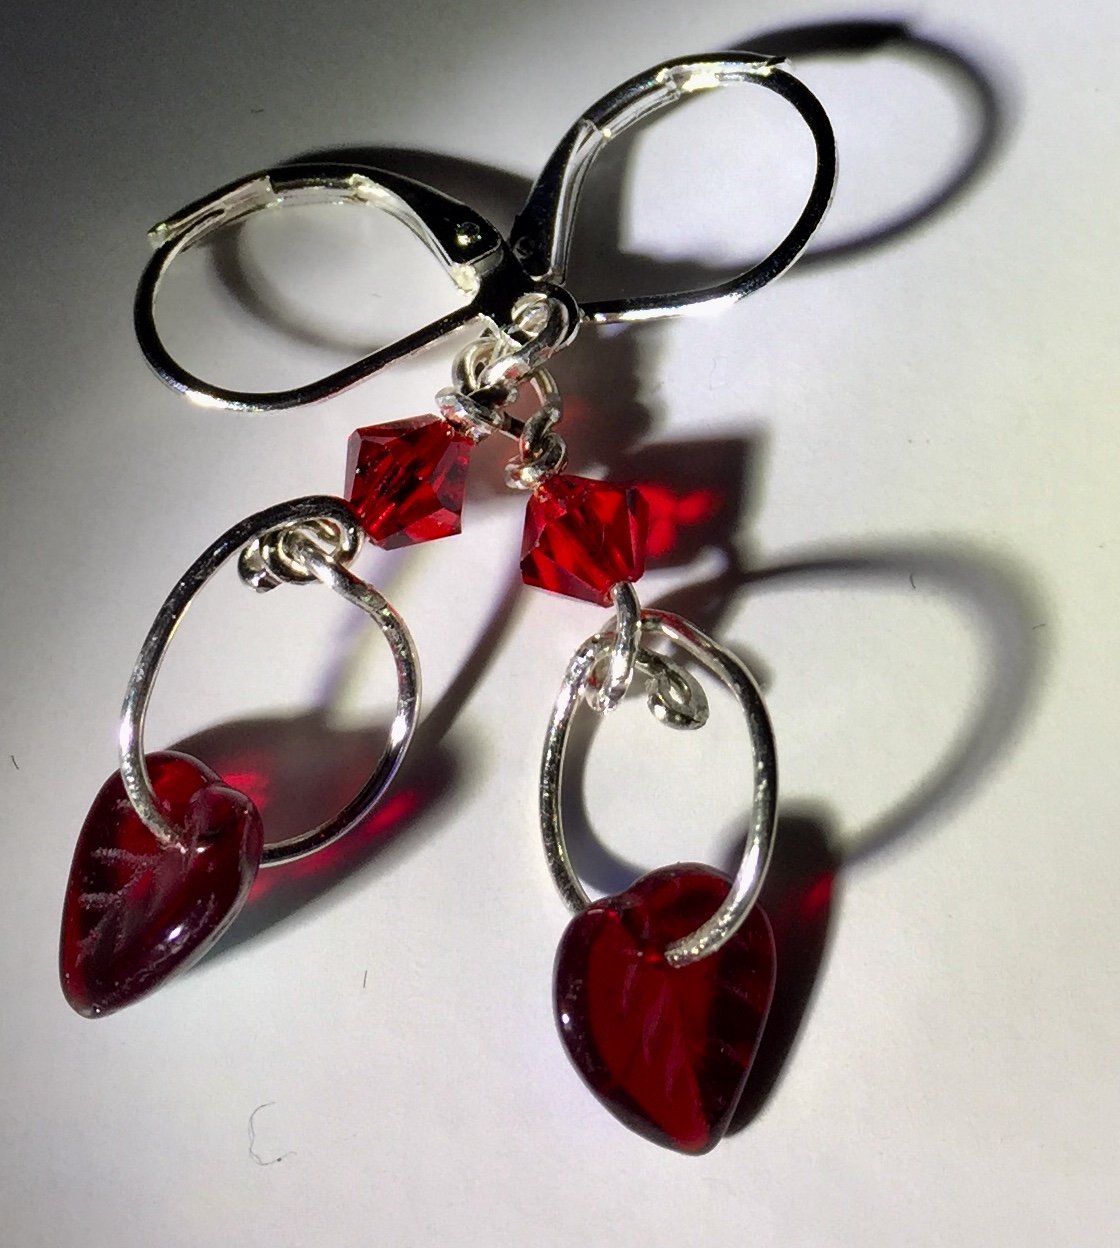 Delicate fine silver loops hold dangling irridescent red glass heart shaped leaf beads below a shiny red Swarovski bicone in these silver leverback earrings. The backs of the glass leaves are irridescent blue, giving them extra shimmer as they rustle with your movement!